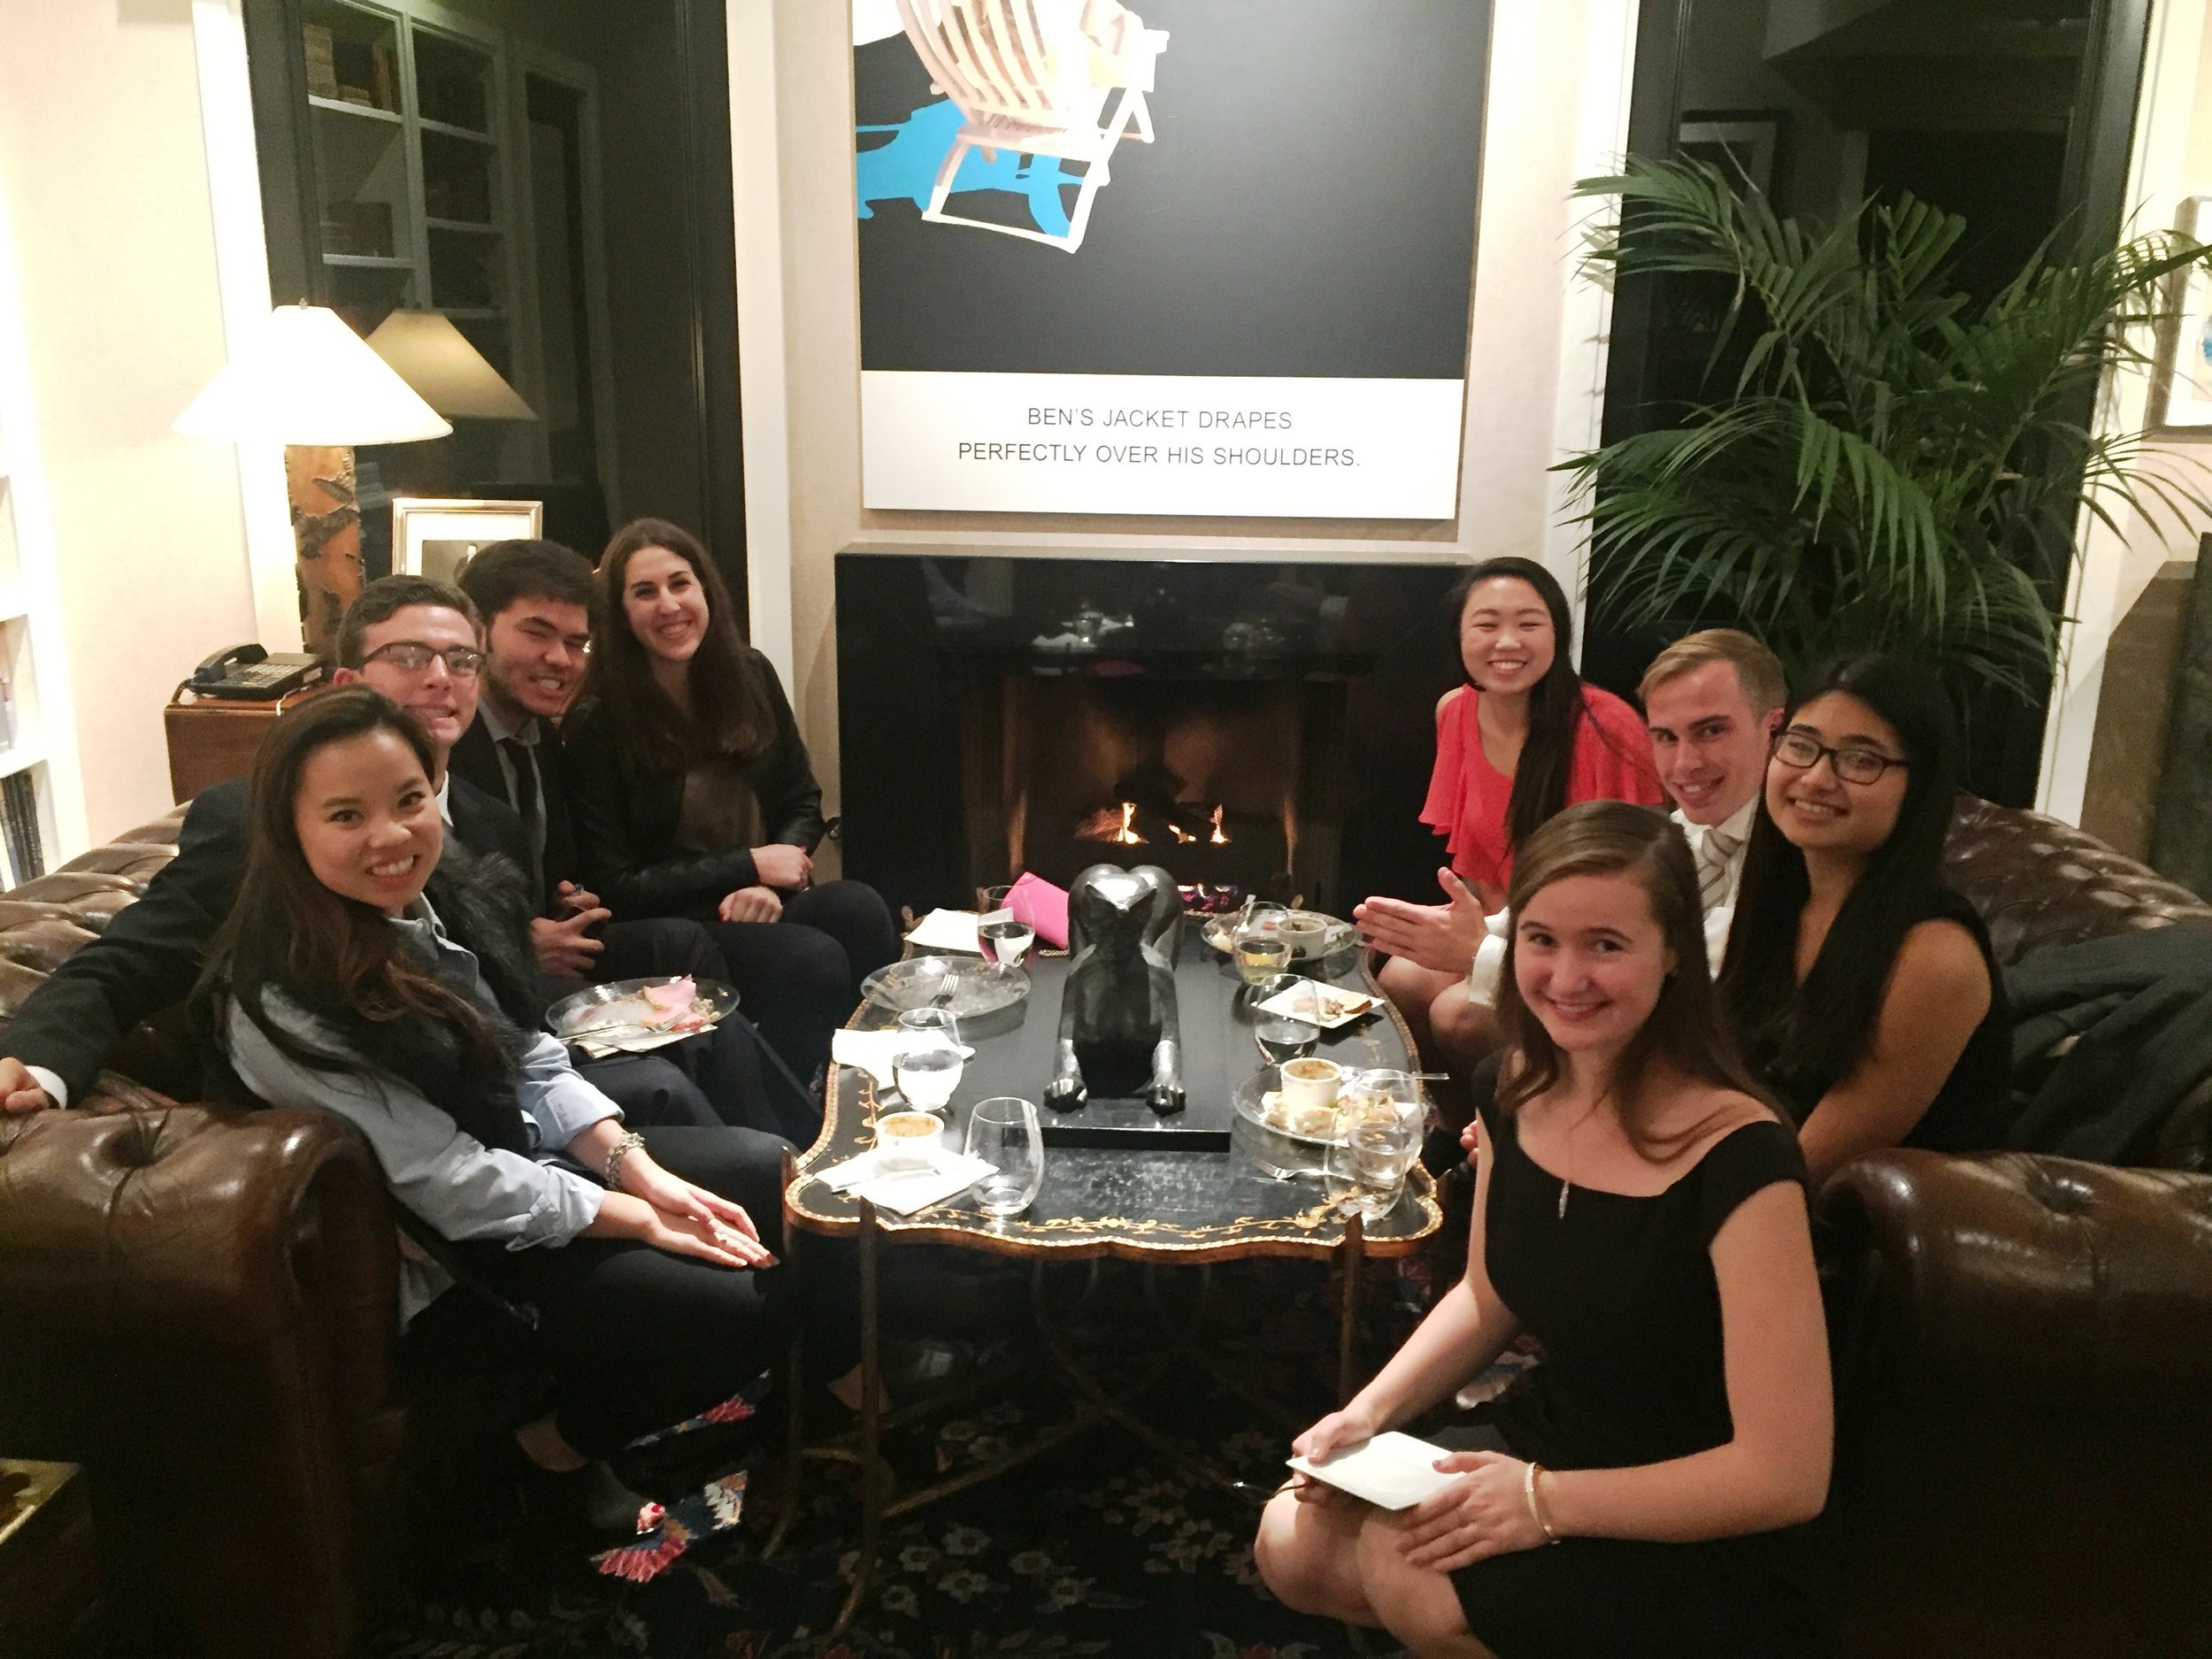   FINE DINING:  Students had the opportunity to dine and interact with alumni at the event.  